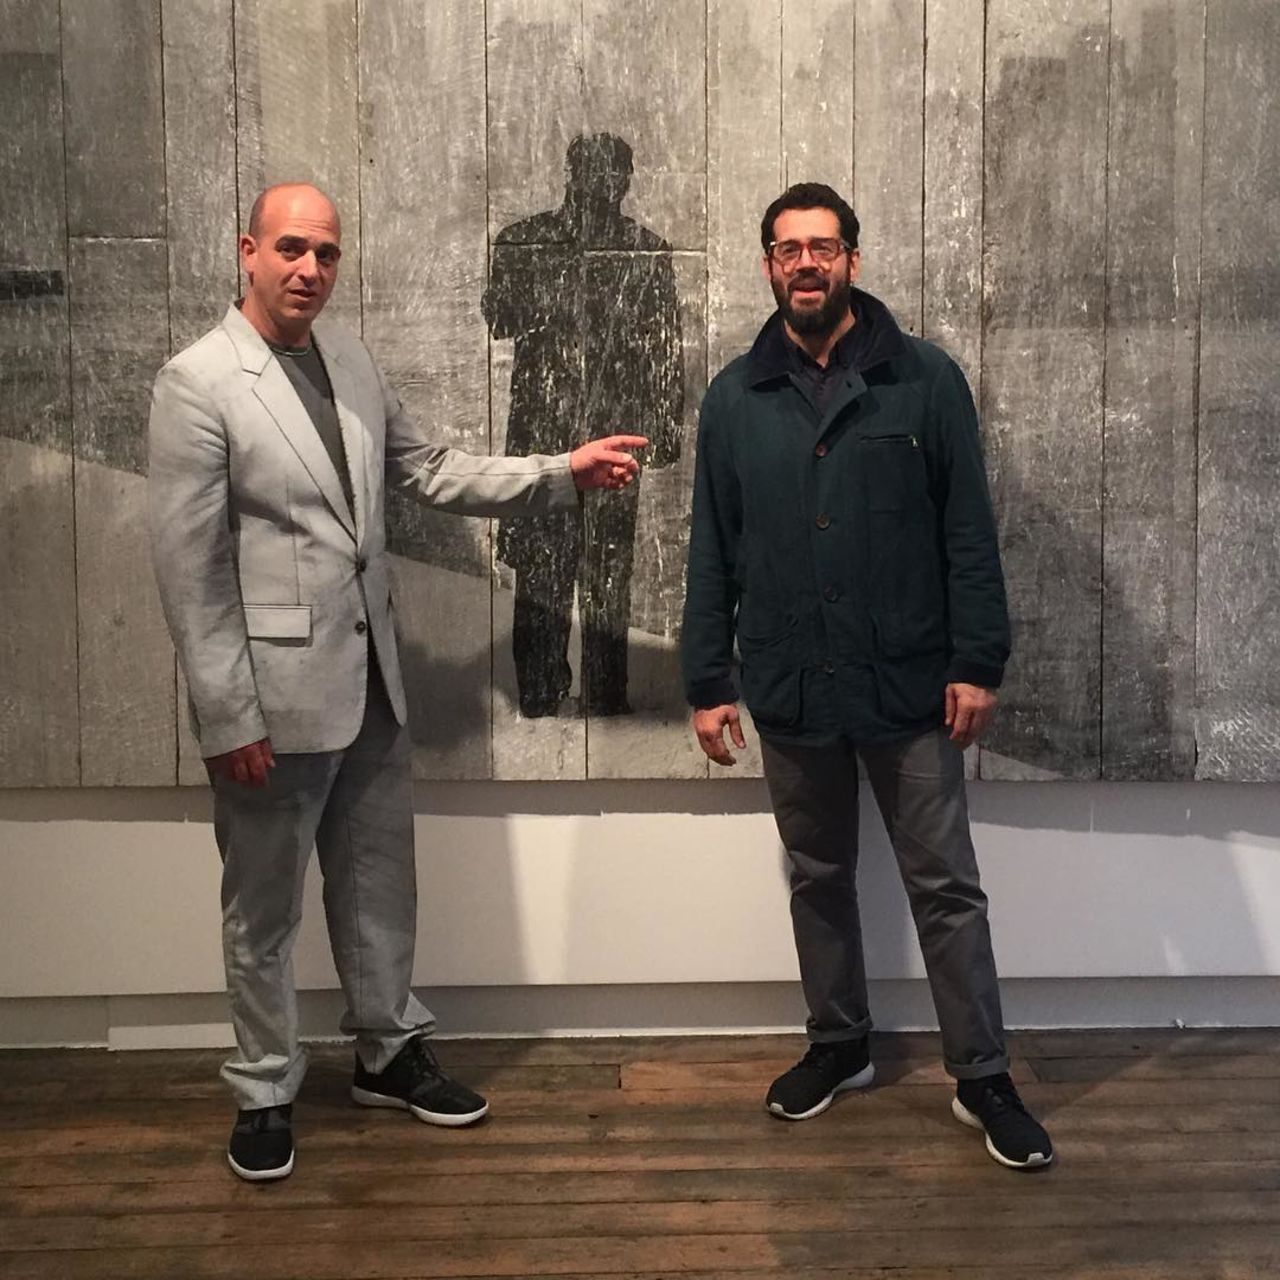 "Before the opening of the same JR show, our mutual friend José Parlá was in town and stopped by early to see us both. It was a great pleasure."